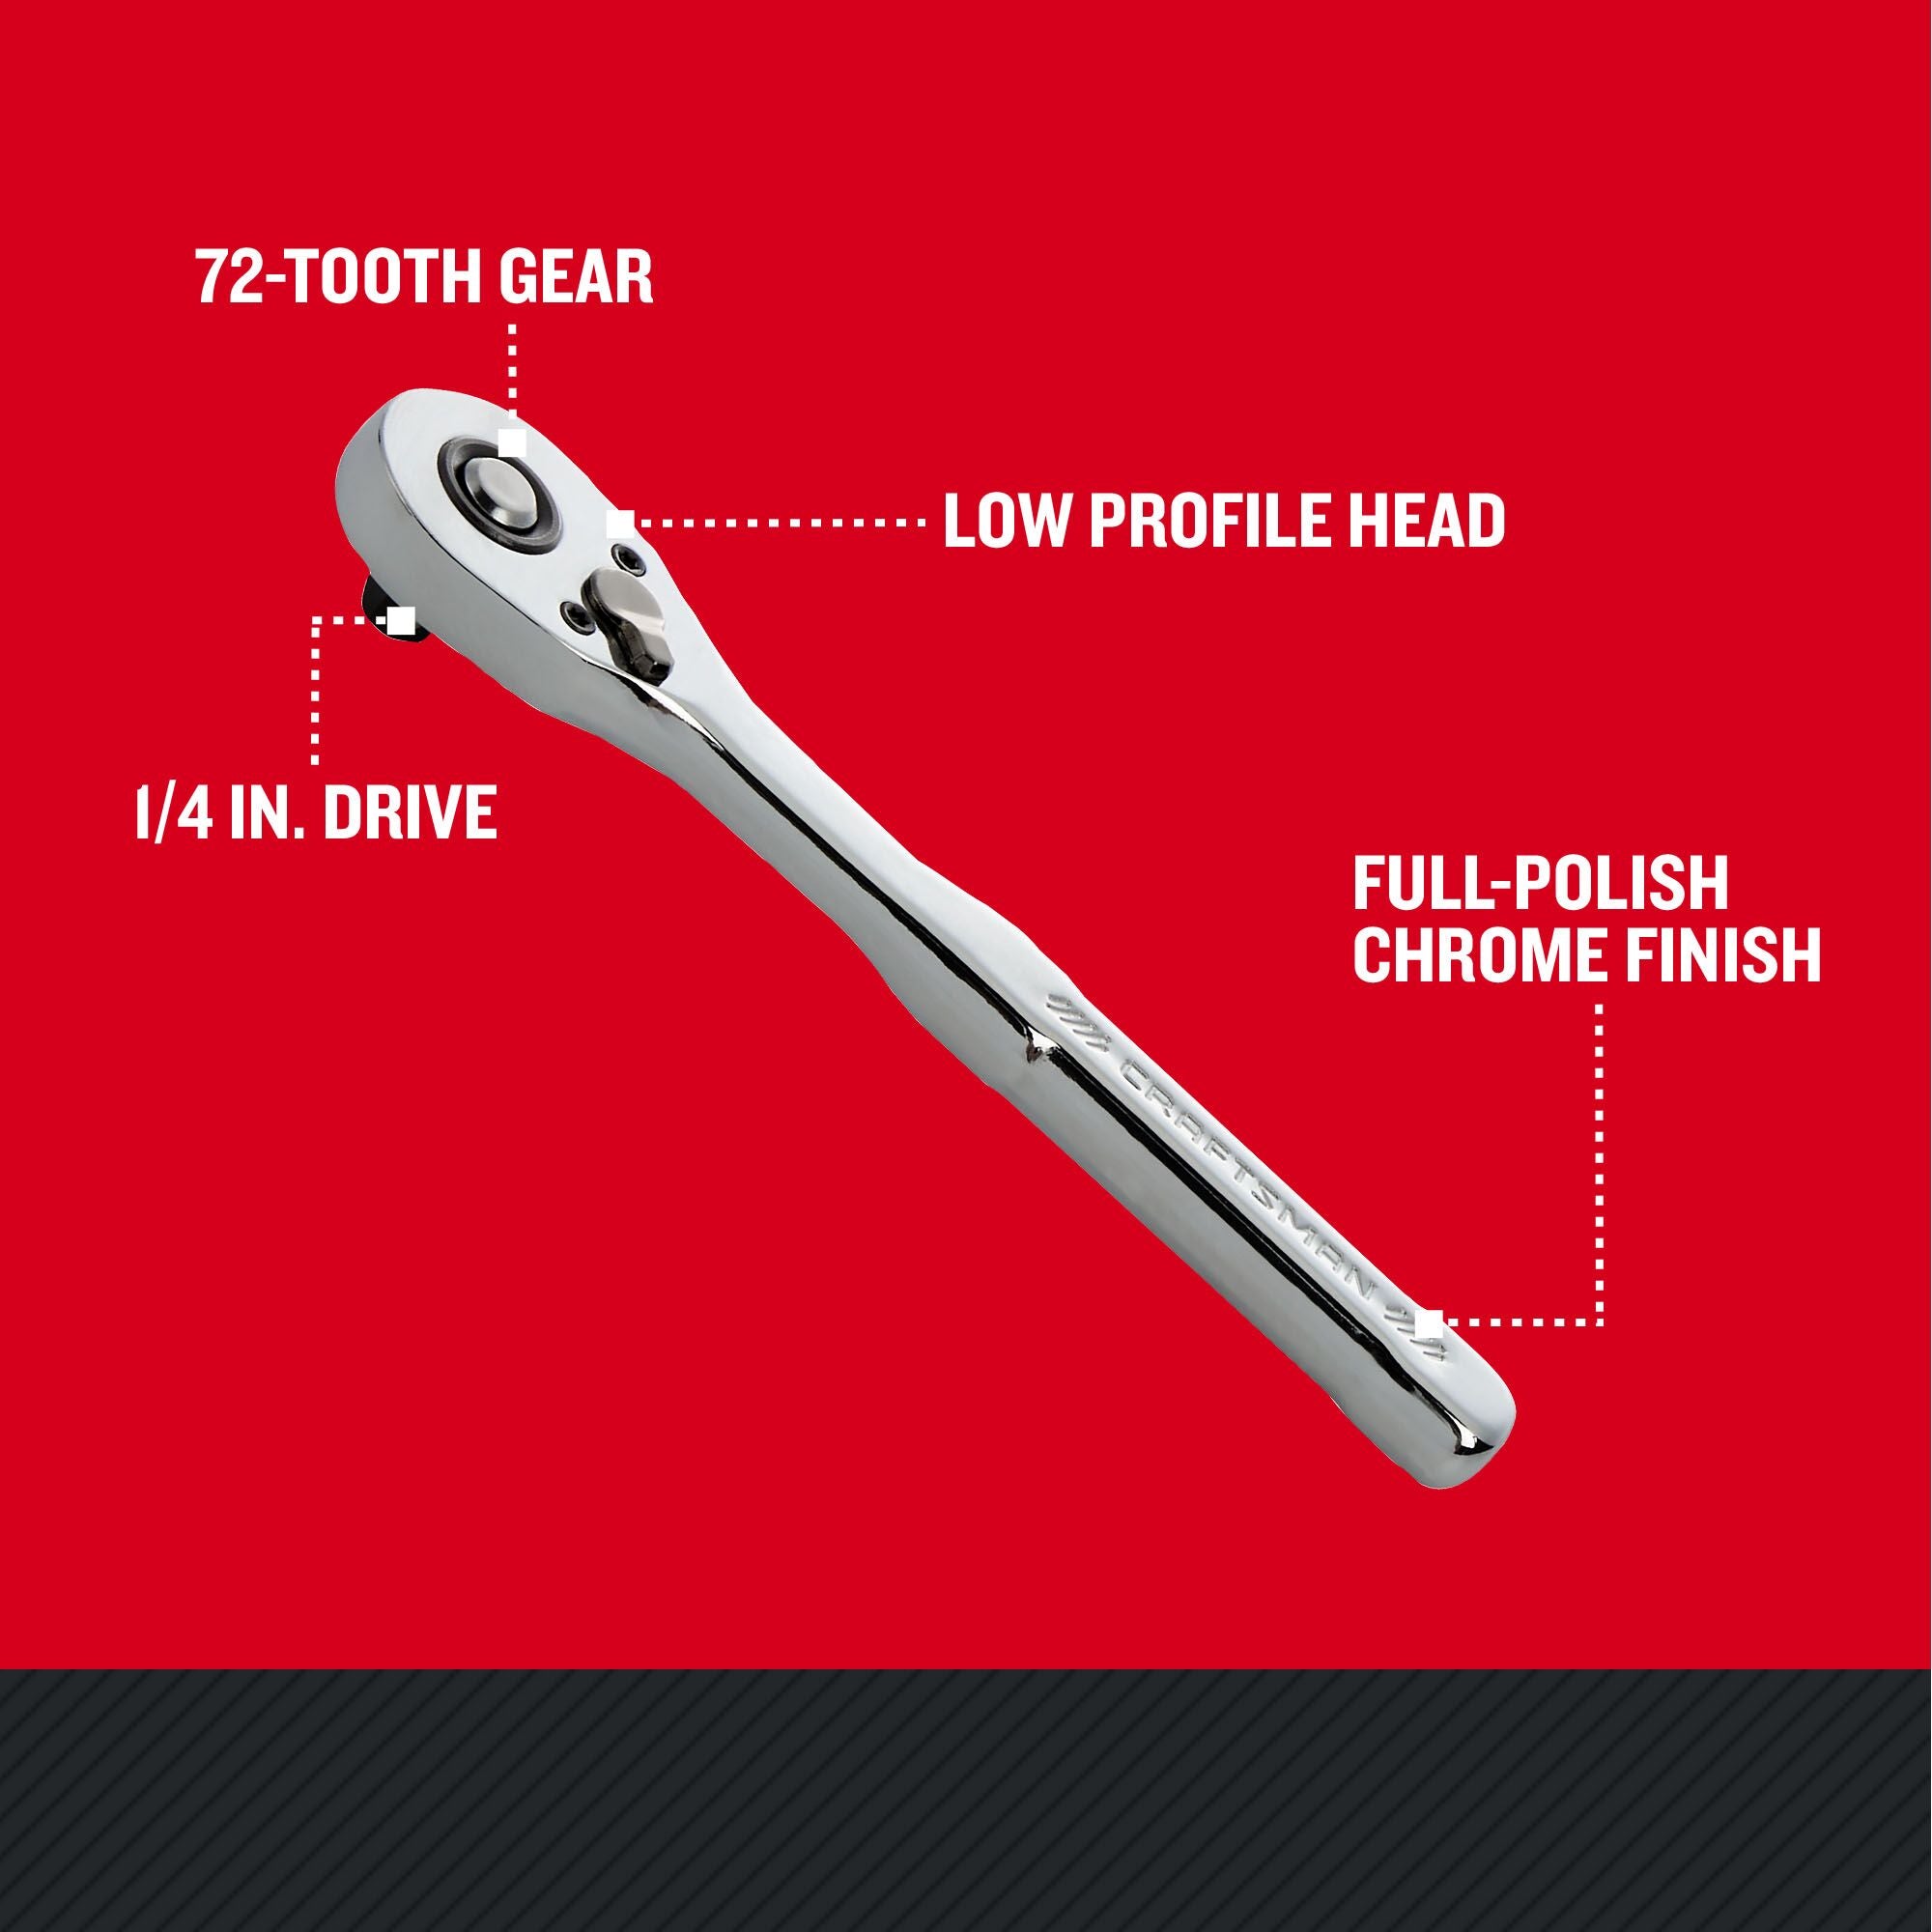 CRAFTSMAN Low Profile 1/4IN DRIVE 72 TOOTH PEAR HEAD RATCHET with features and benefits highlighted